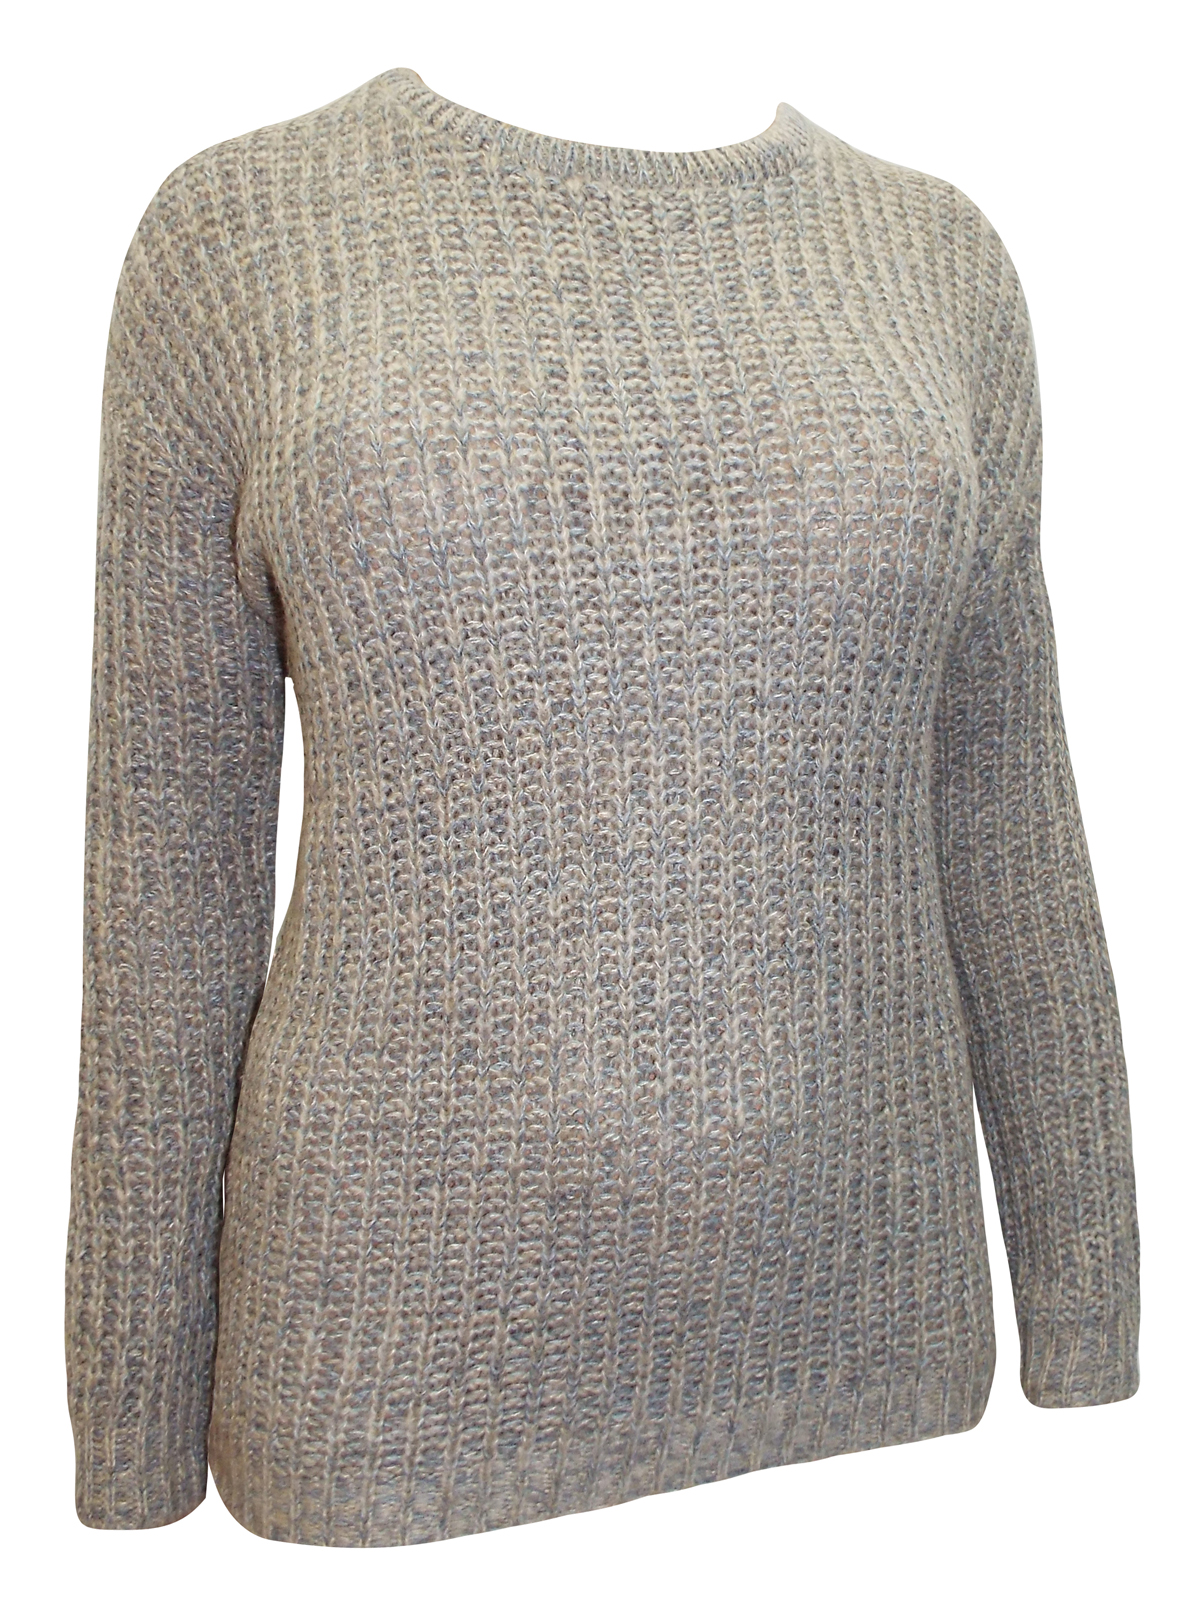 PLUS - - Plus TAUPE Round Neck Cable Knit Jumper - Plus Size 22/24 to ...